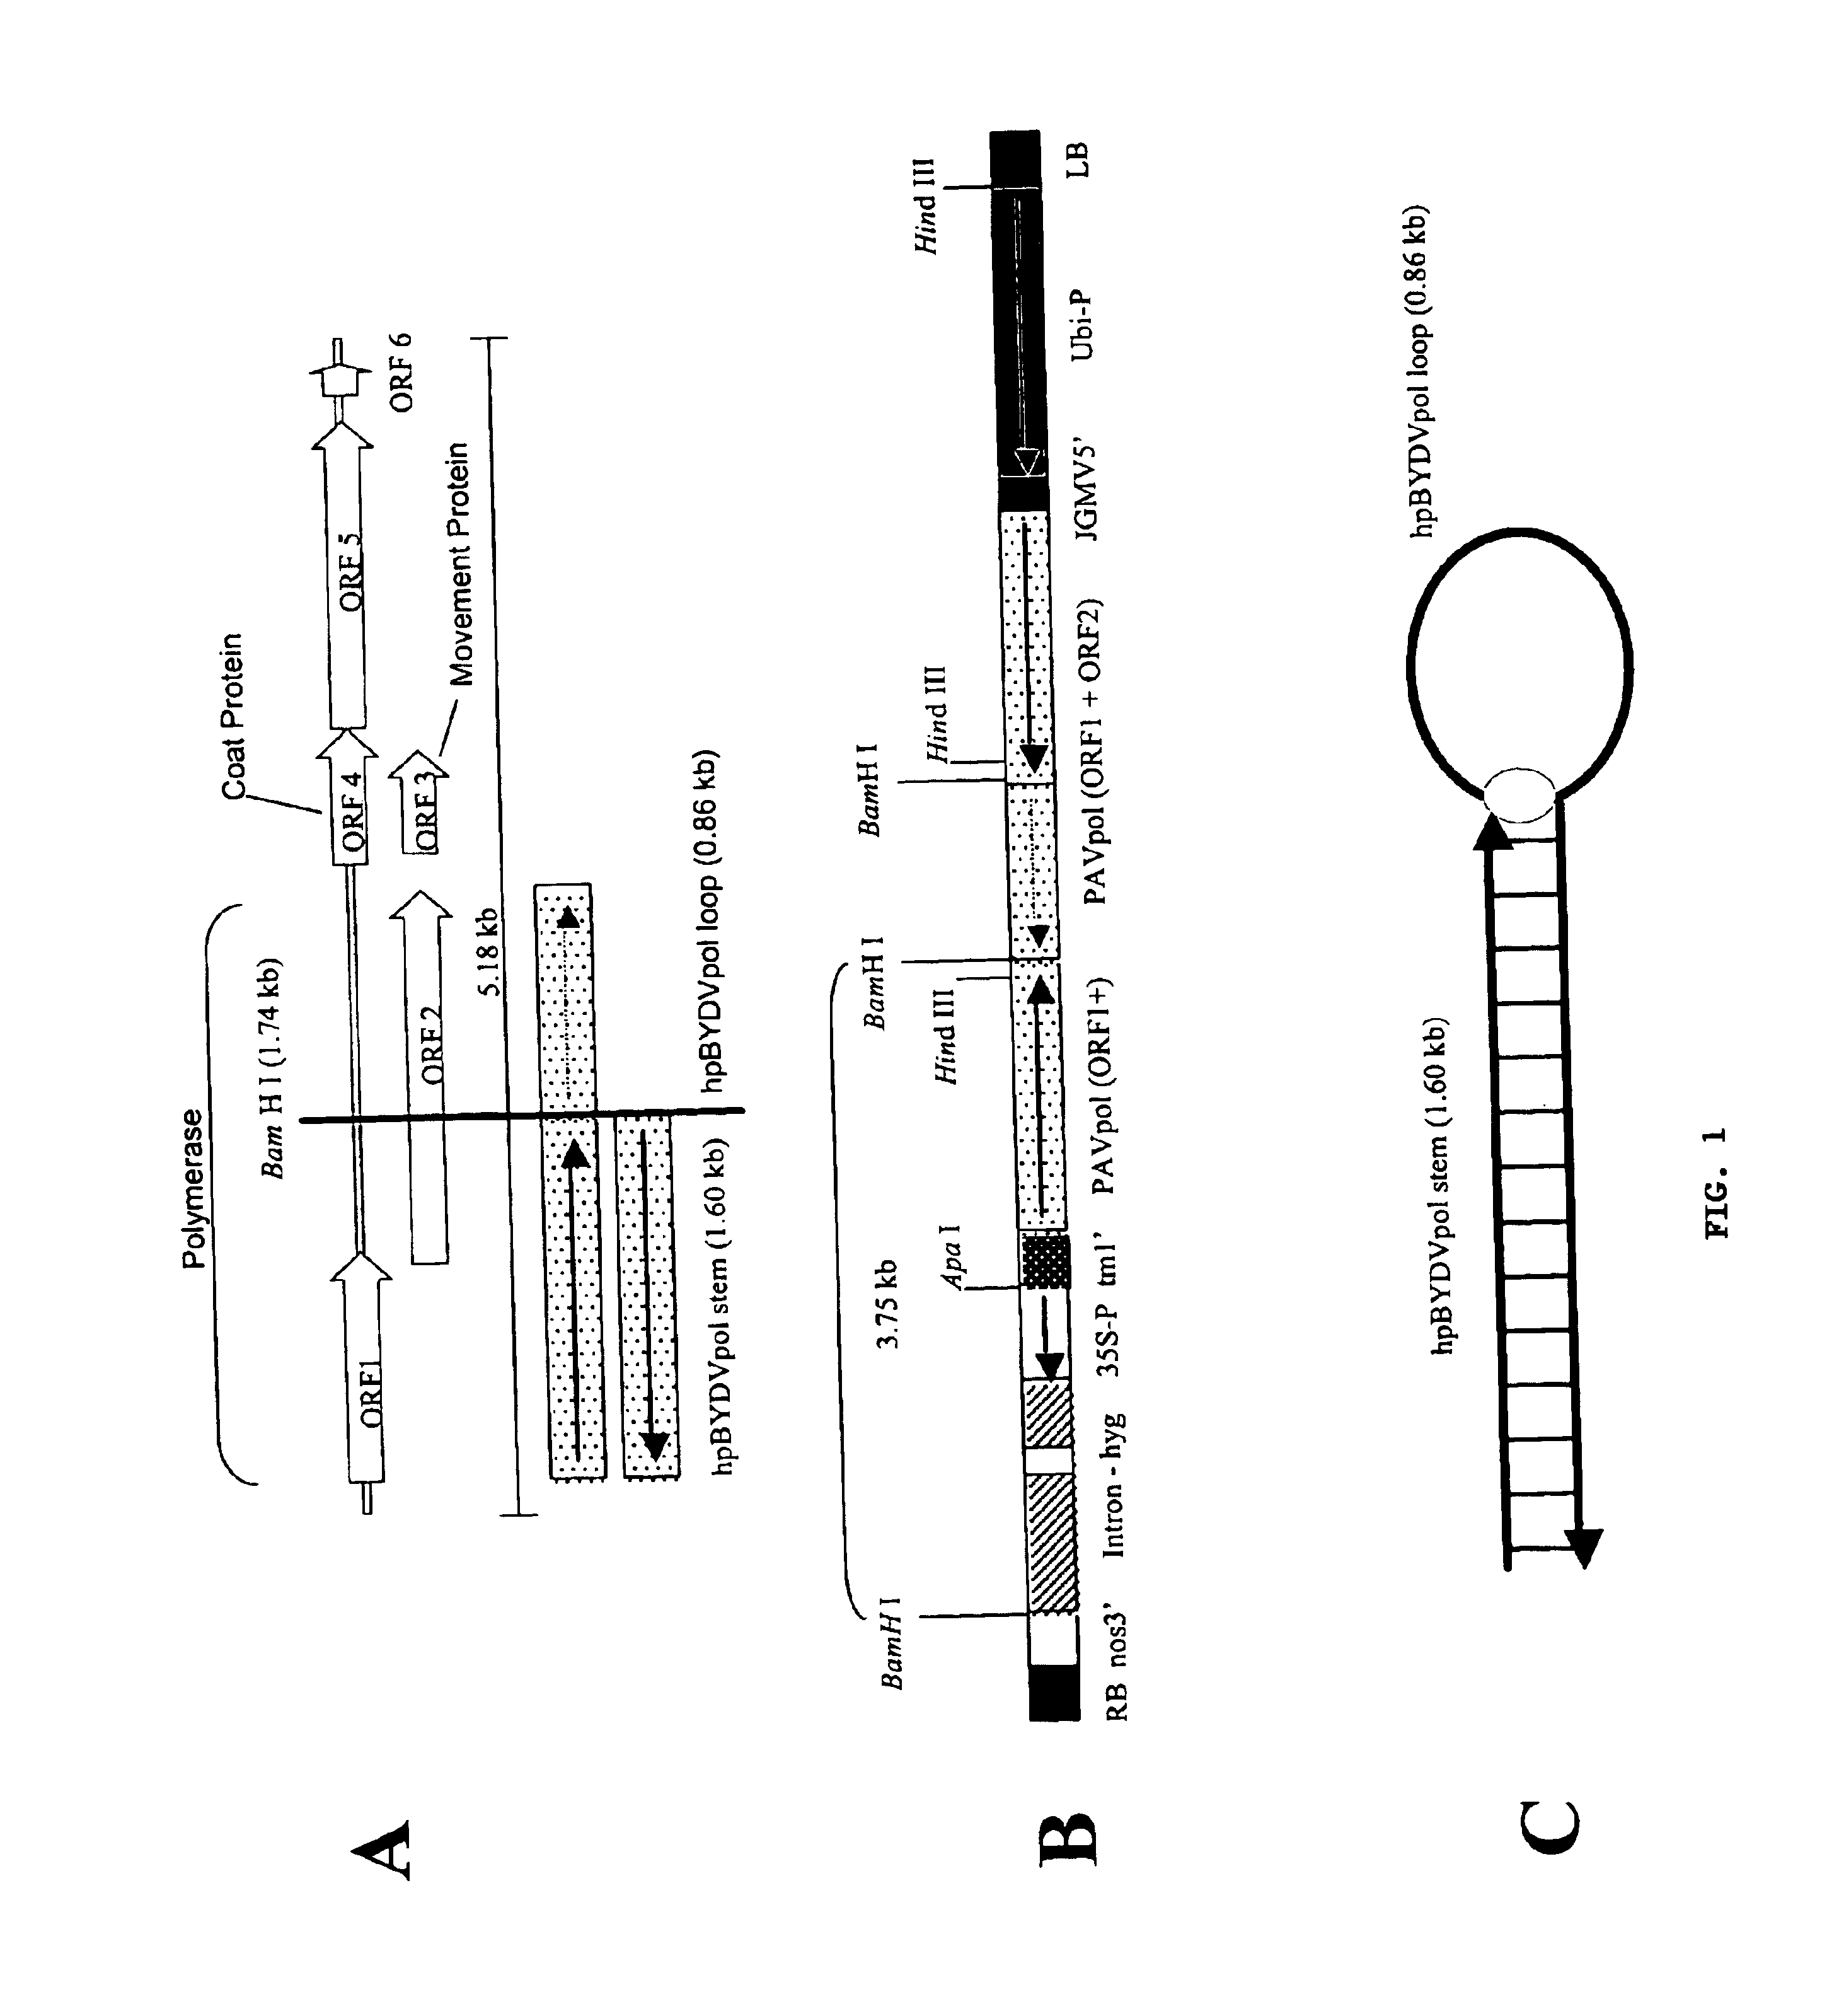 Methods and means for producing barley yellow dwarf virus resistant cereal plants